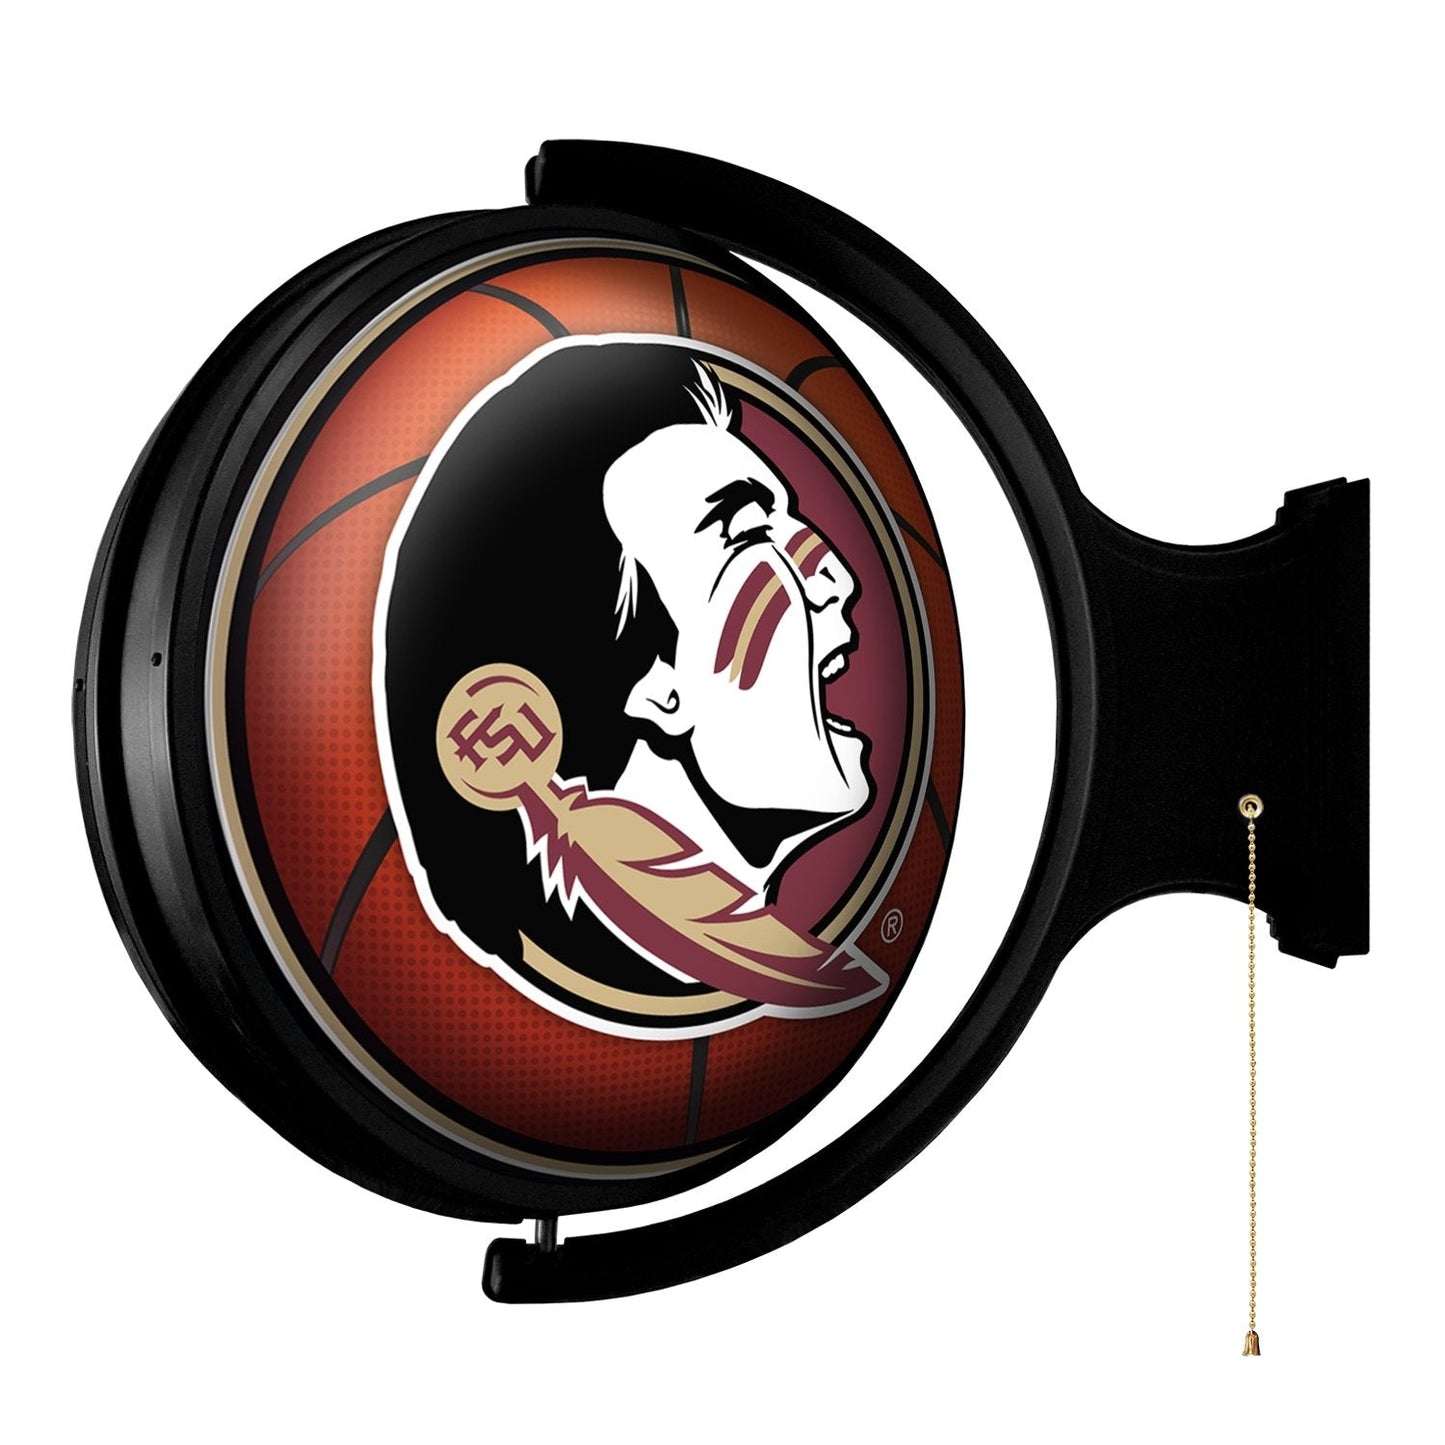 Florida State Seminoles: Basketball - Original Round Rotating Lighted Wall Sign - The Fan-Brand